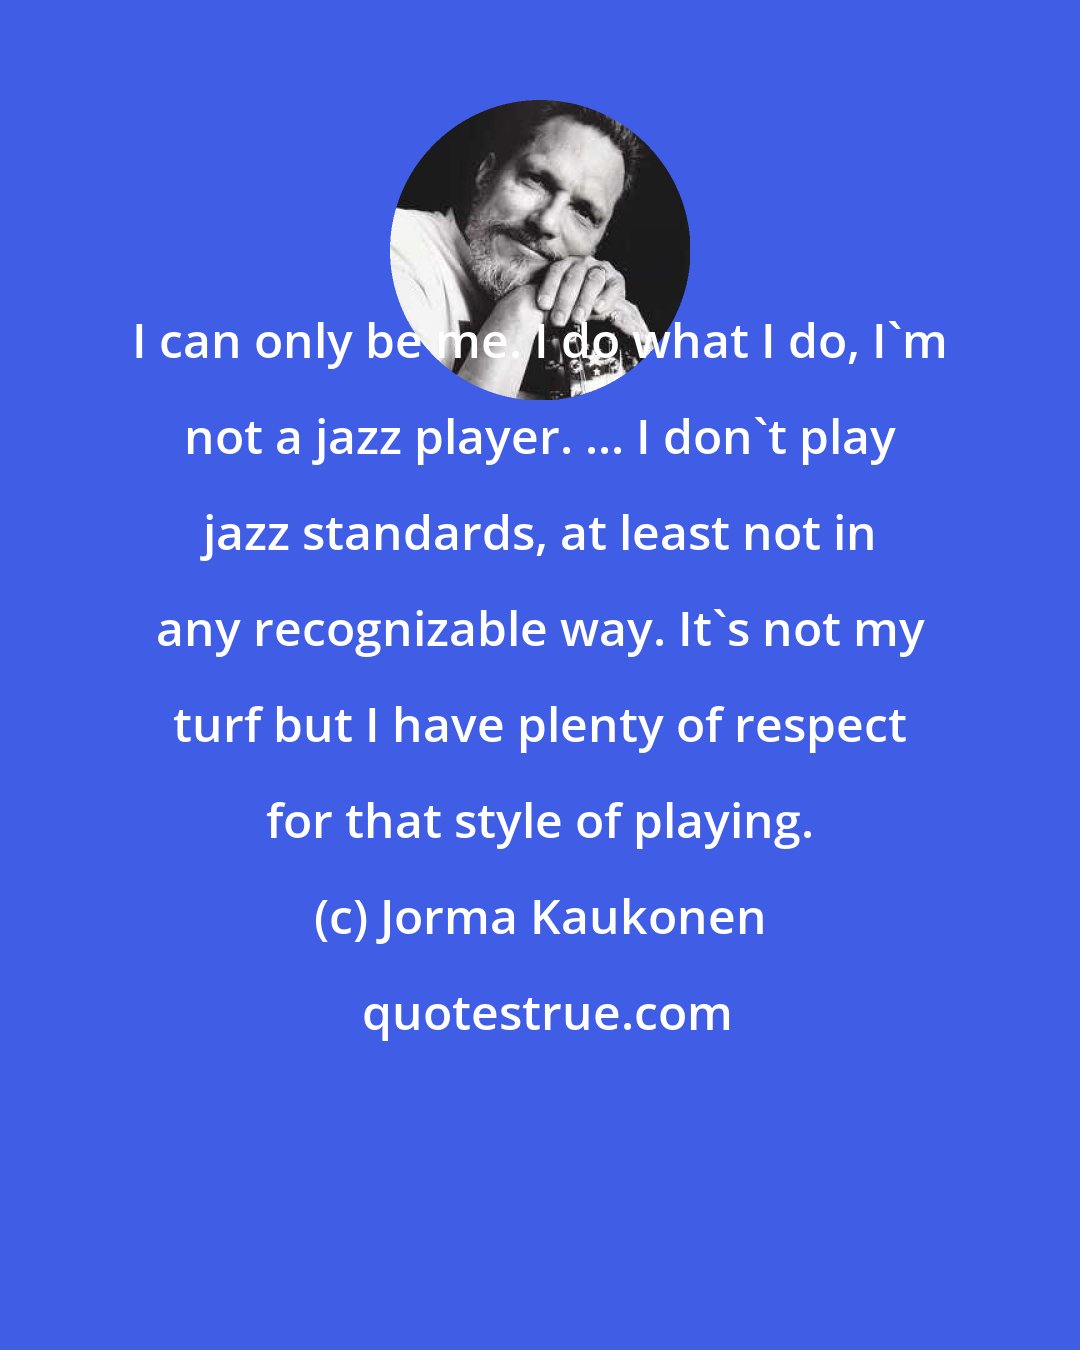 Jorma Kaukonen: I can only be me. I do what I do, I'm not a jazz player. ... I don't play jazz standards, at least not in any recognizable way. It's not my turf but I have plenty of respect for that style of playing.